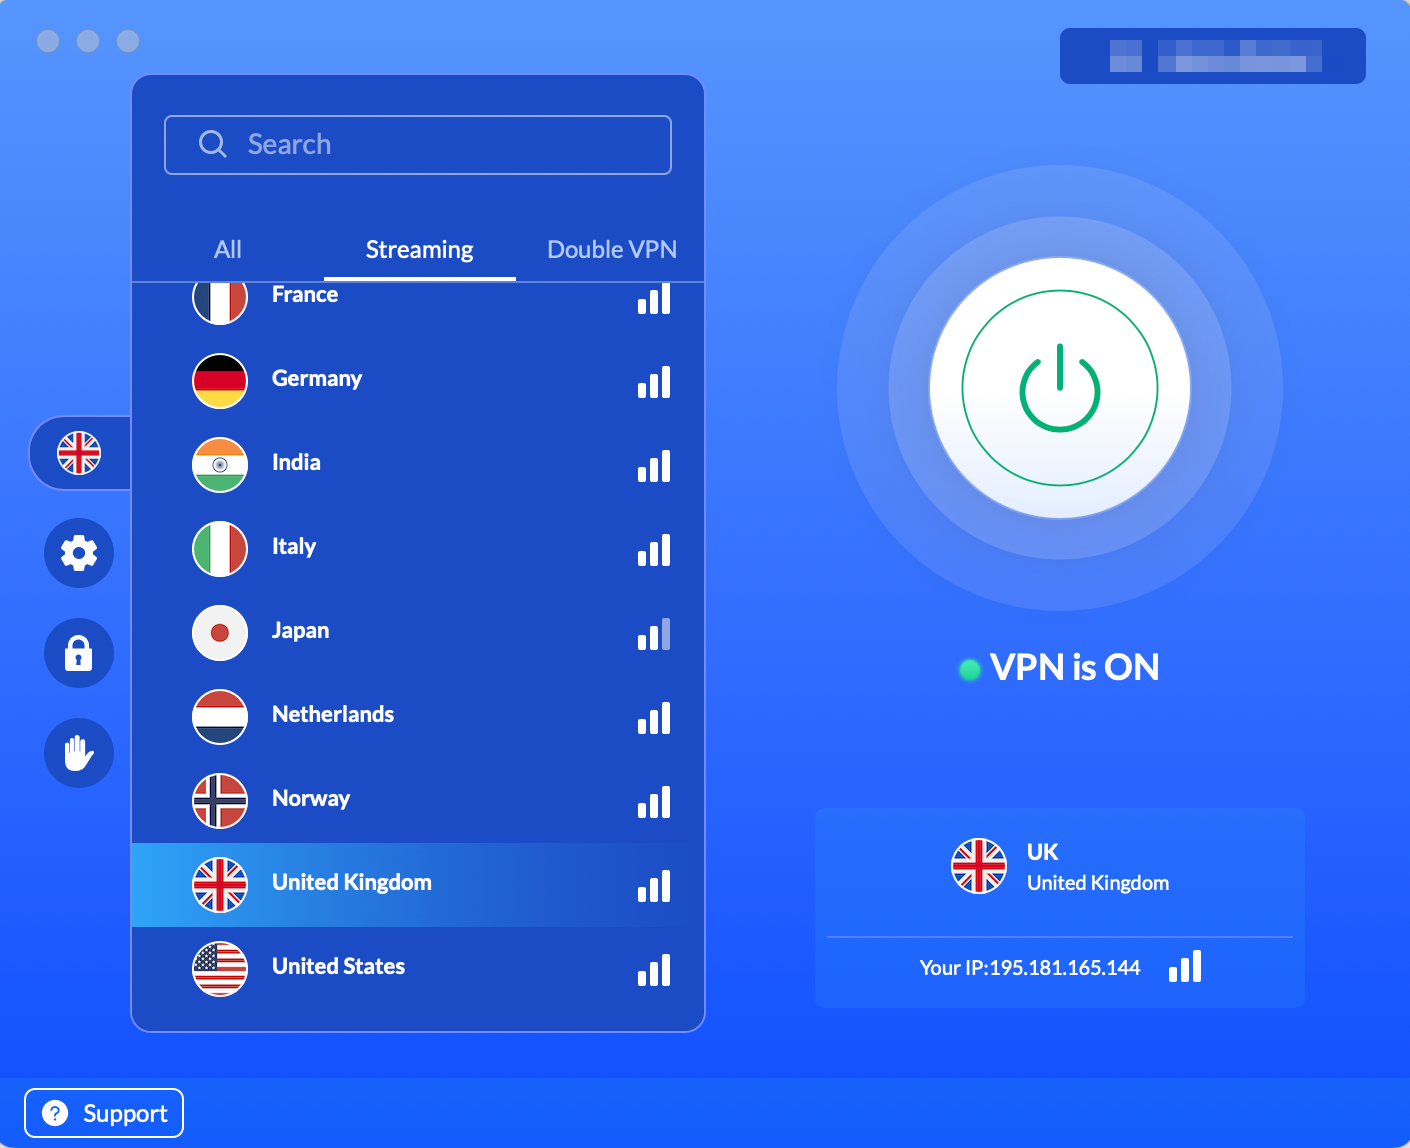 How to watch UK Netflix. Step 3 - connect to the VPN.